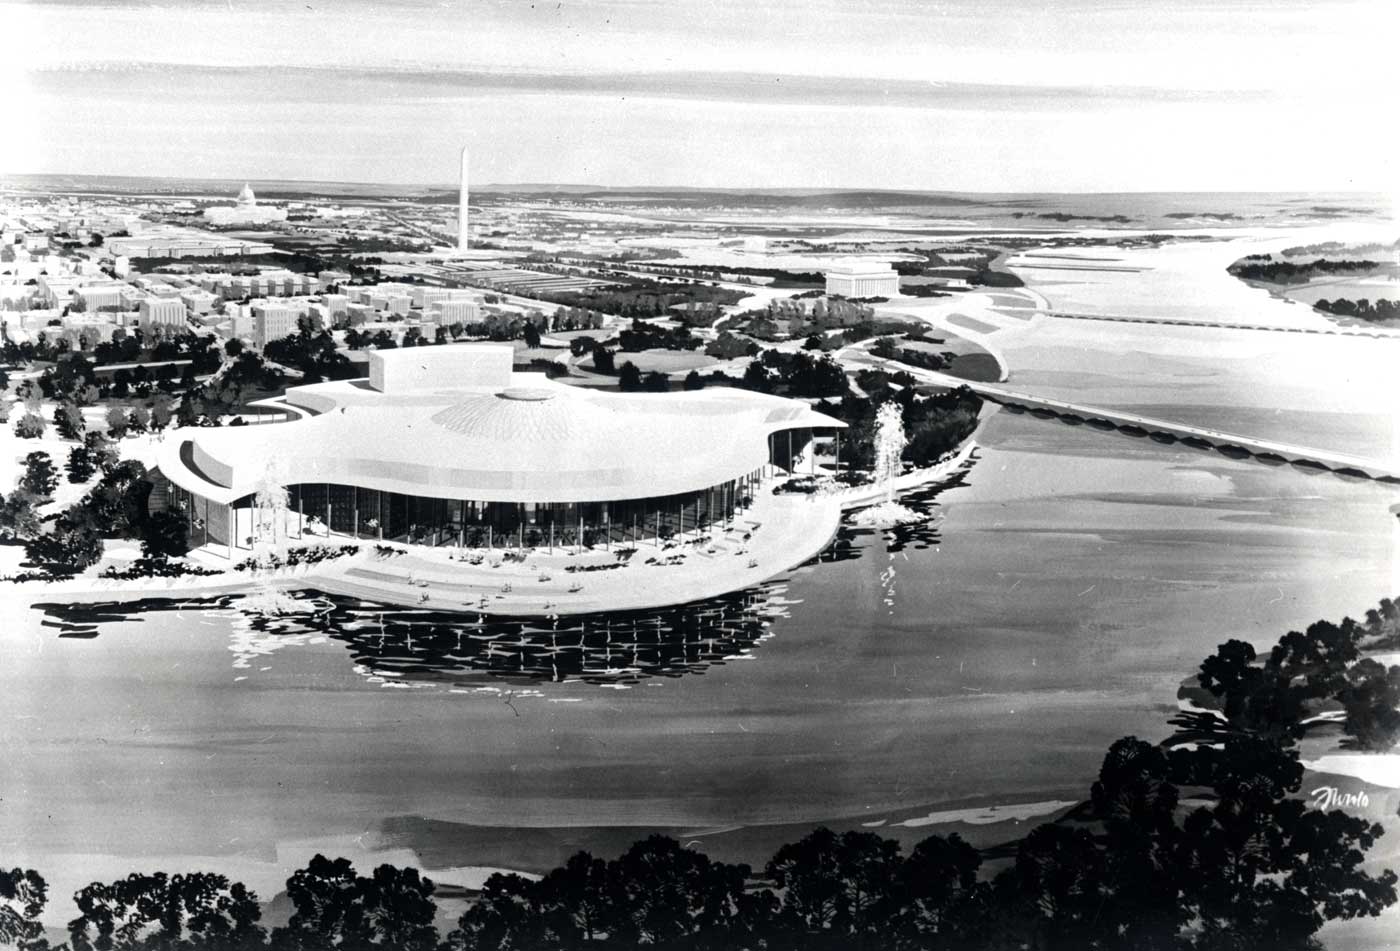 Preliminary proposal for the National Cultural Center (later Kennedy Center), Edward Durell Stone, 1959. Stone’s curvilinear original design contrasts sharply with the boxy design that was executed. Edward Durell Stone Collection (MC 340), Box 104. Special Collections, University of Arkansas Libraries, Fayetteville.